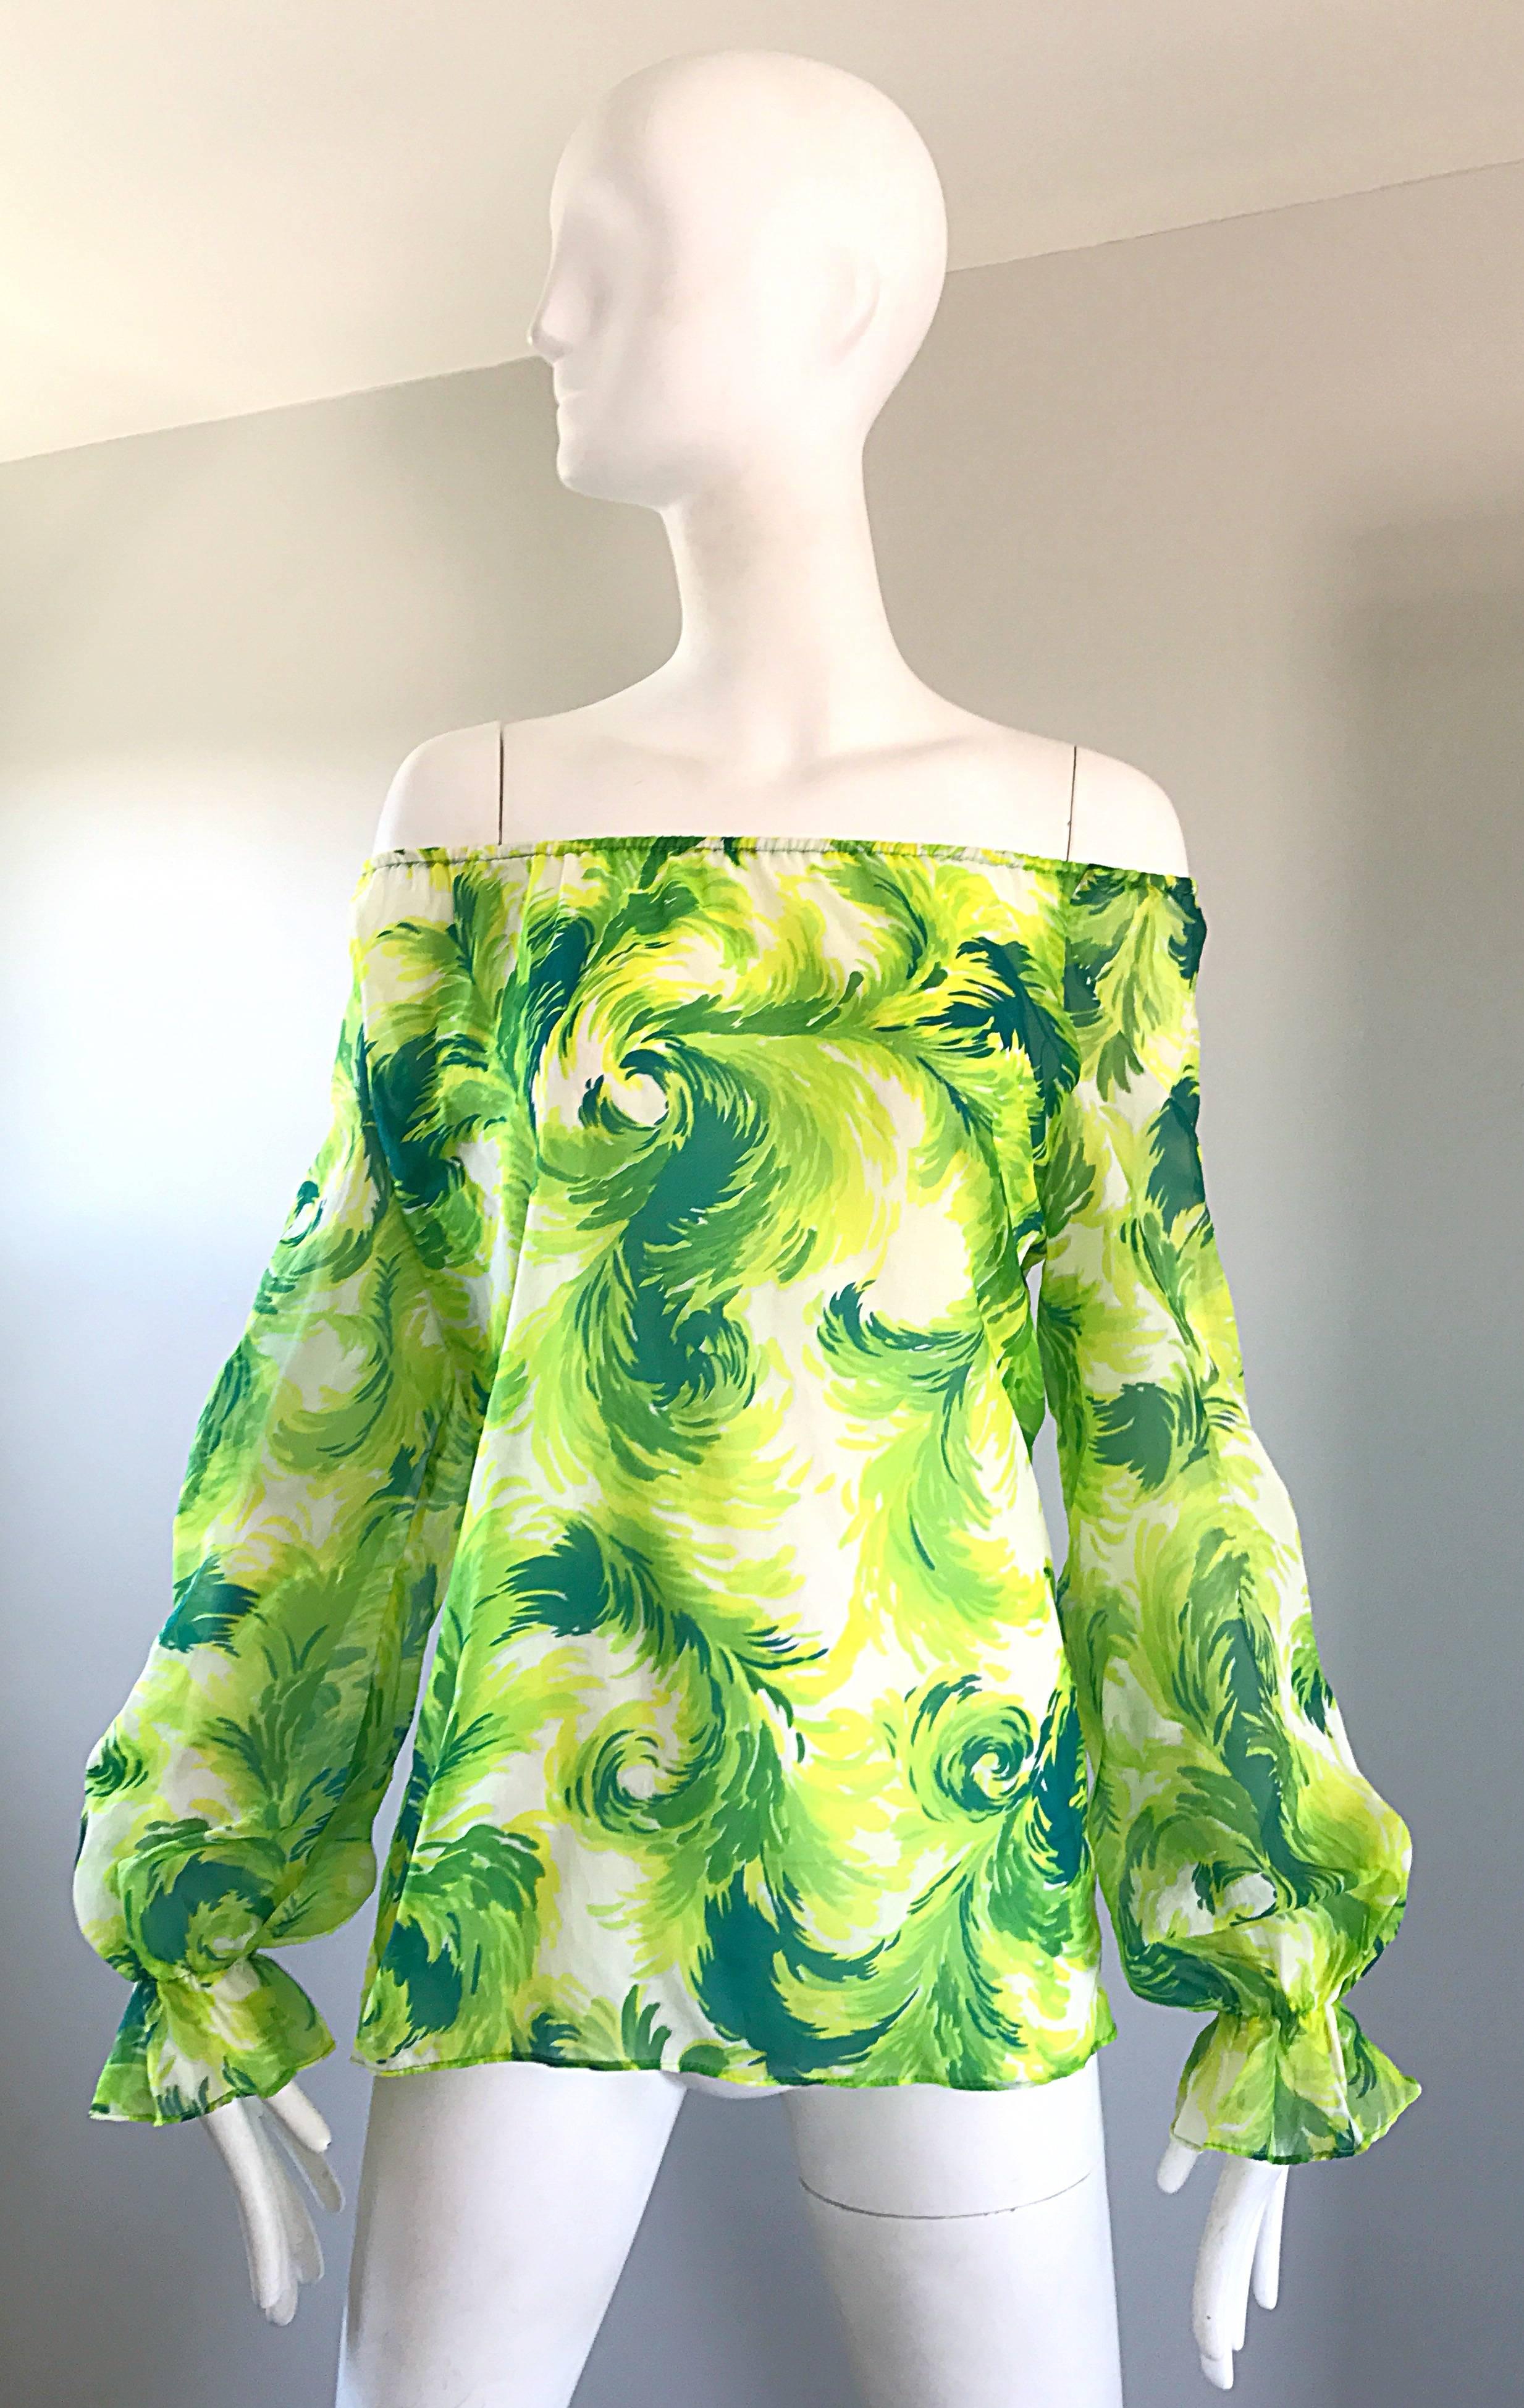 Incredible vintage 1970s green and white feather print off-the-shoulder boho blouse! Features fabulous feathers in vibrant green and lime green throughout. Sits off the shoulder, but could also be worn up as well. Great belted or alone with shorts